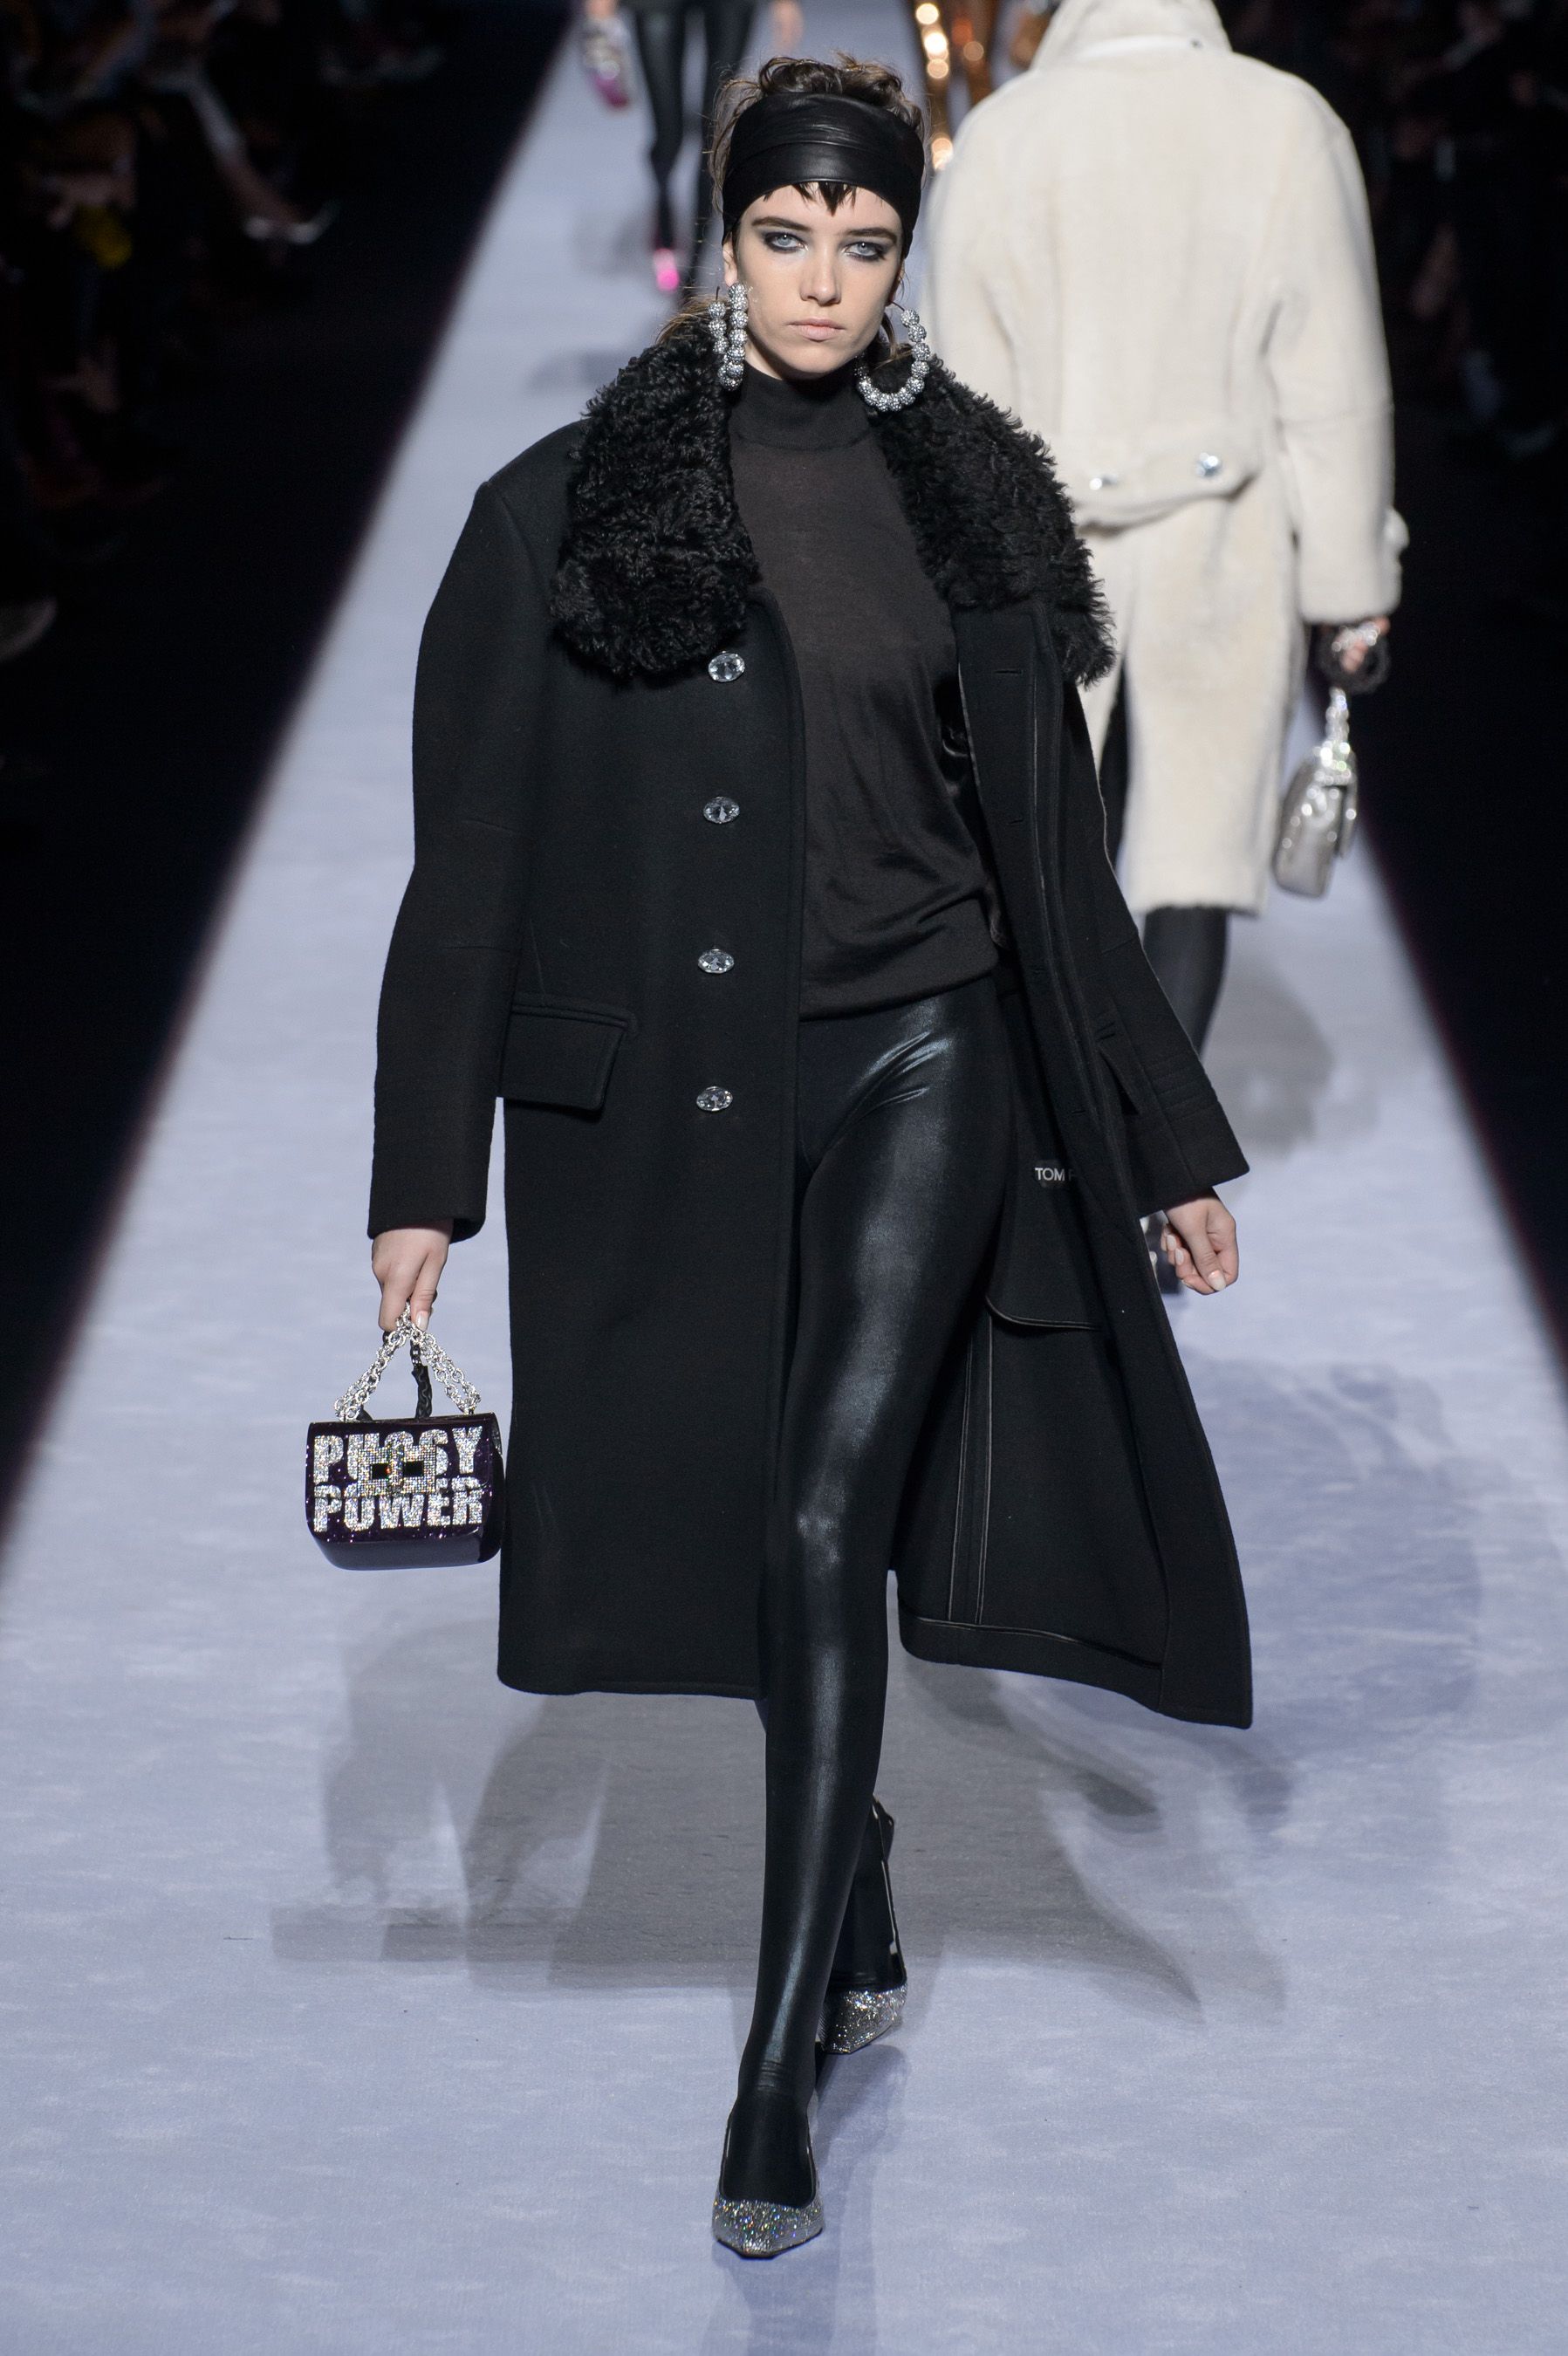 36 Looks From Tom Ford Fall 2018 NYFW Show – Tom Ford Runway at New York  Fashion Week